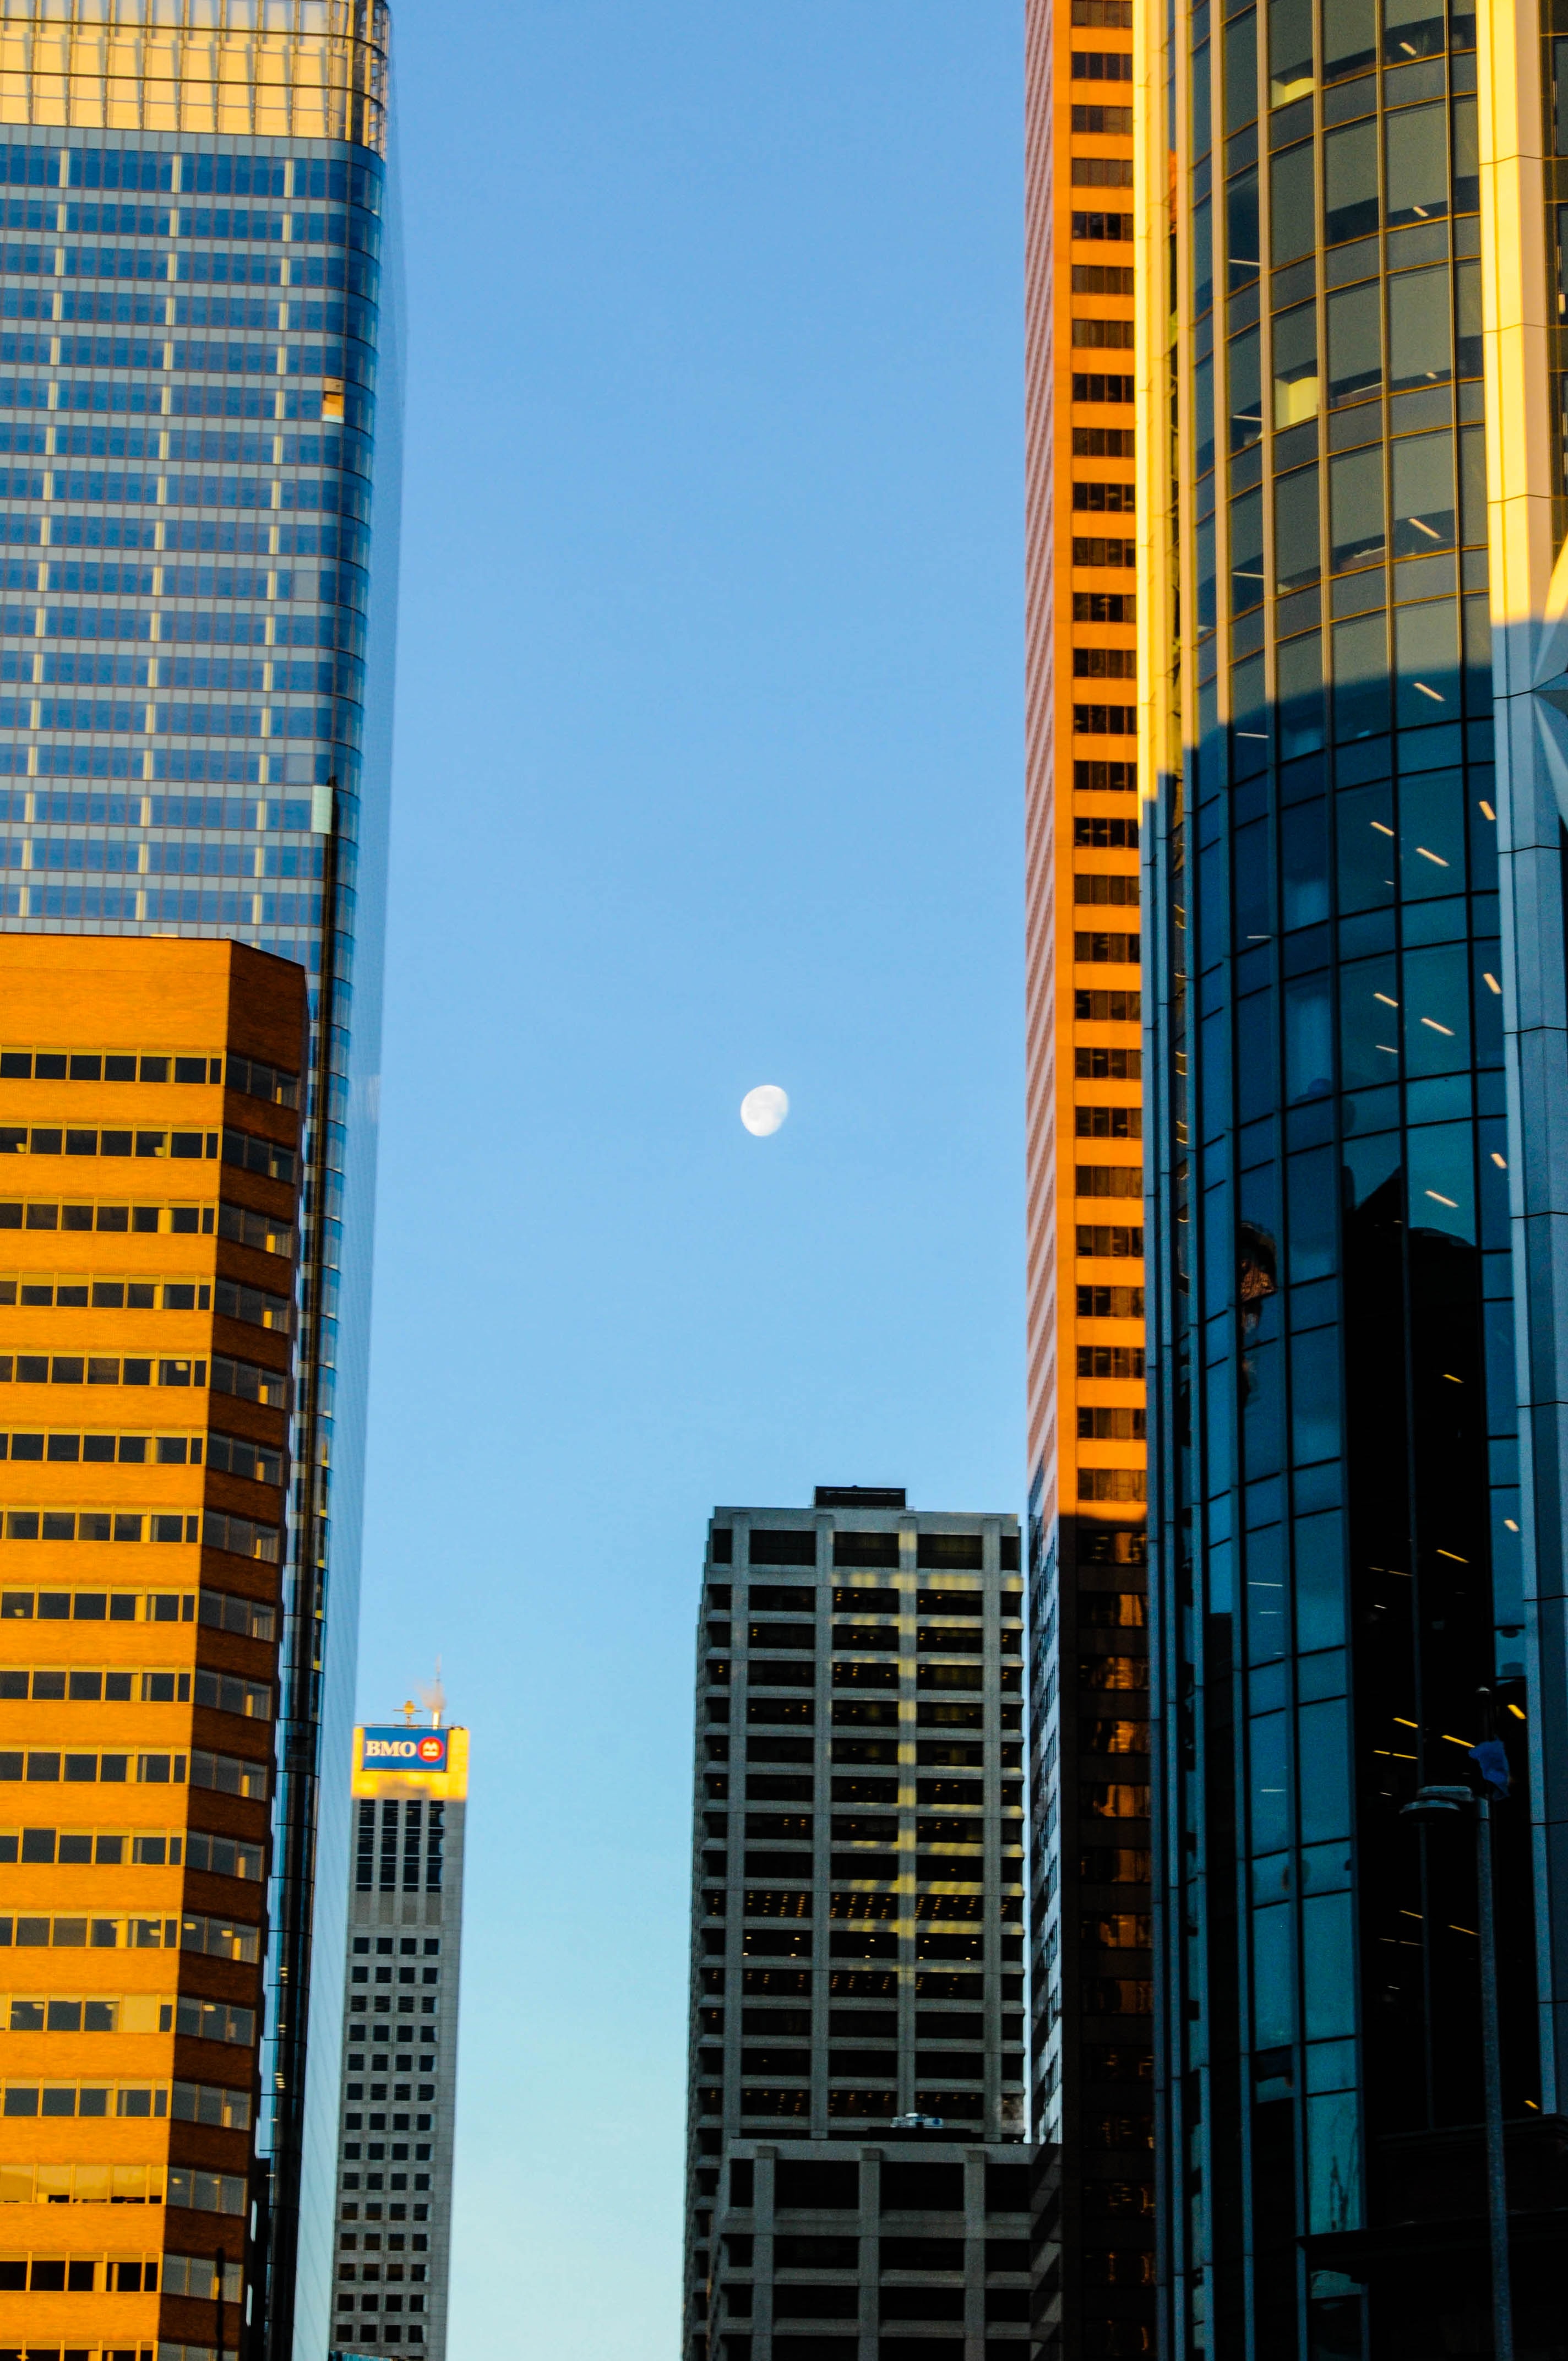 Hd 1080p Images city, building, moon, skyscrapers